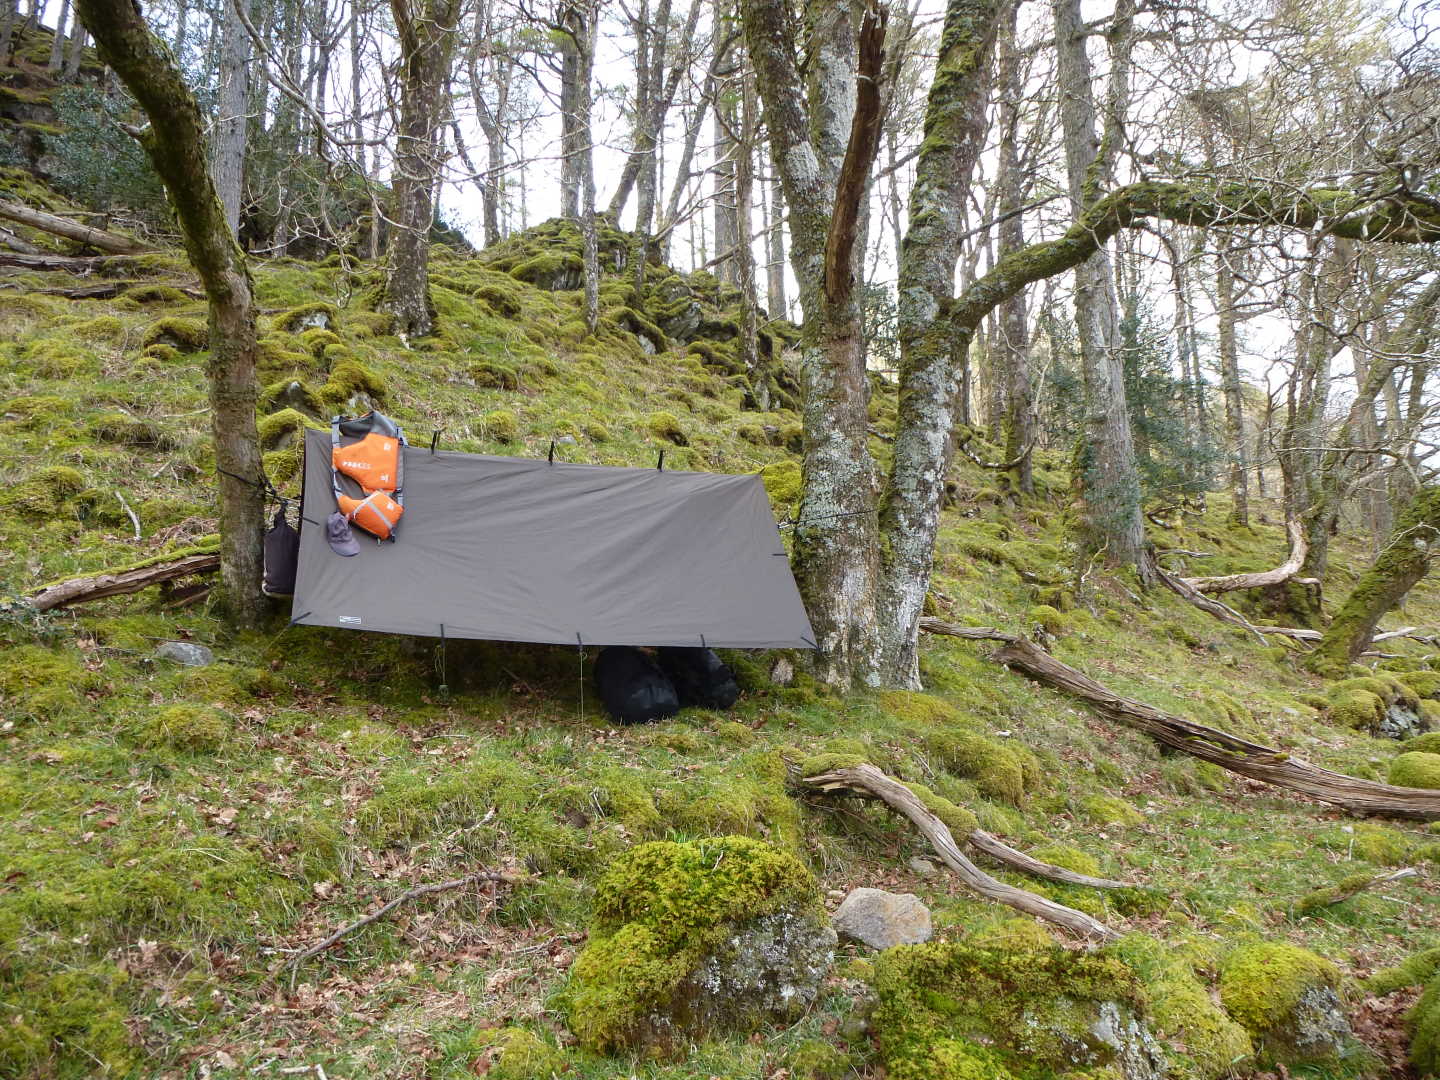 A hammock tied between two trees surrounded by mossy woodland